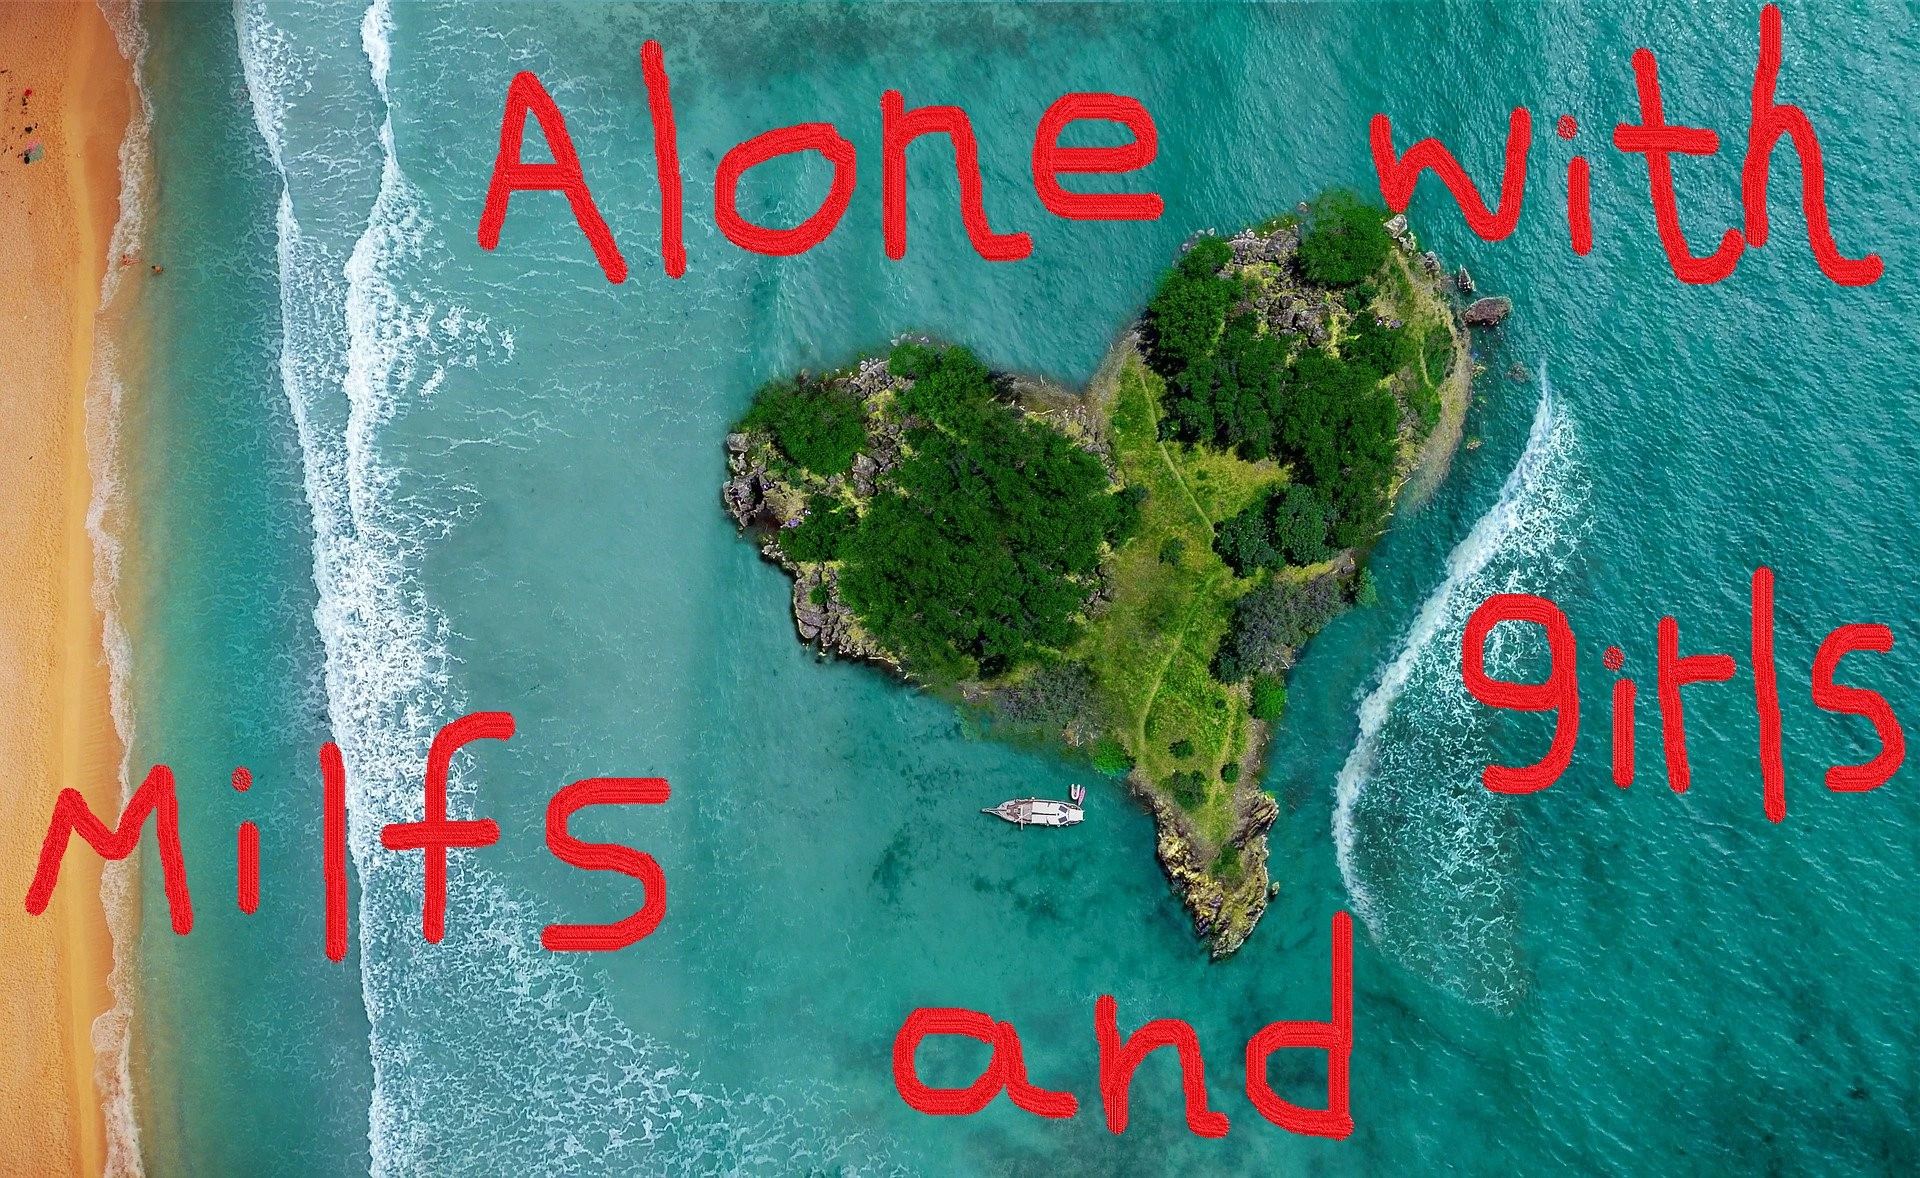 Alone in the milfy island with milfs and girls [v1.0 release] main image